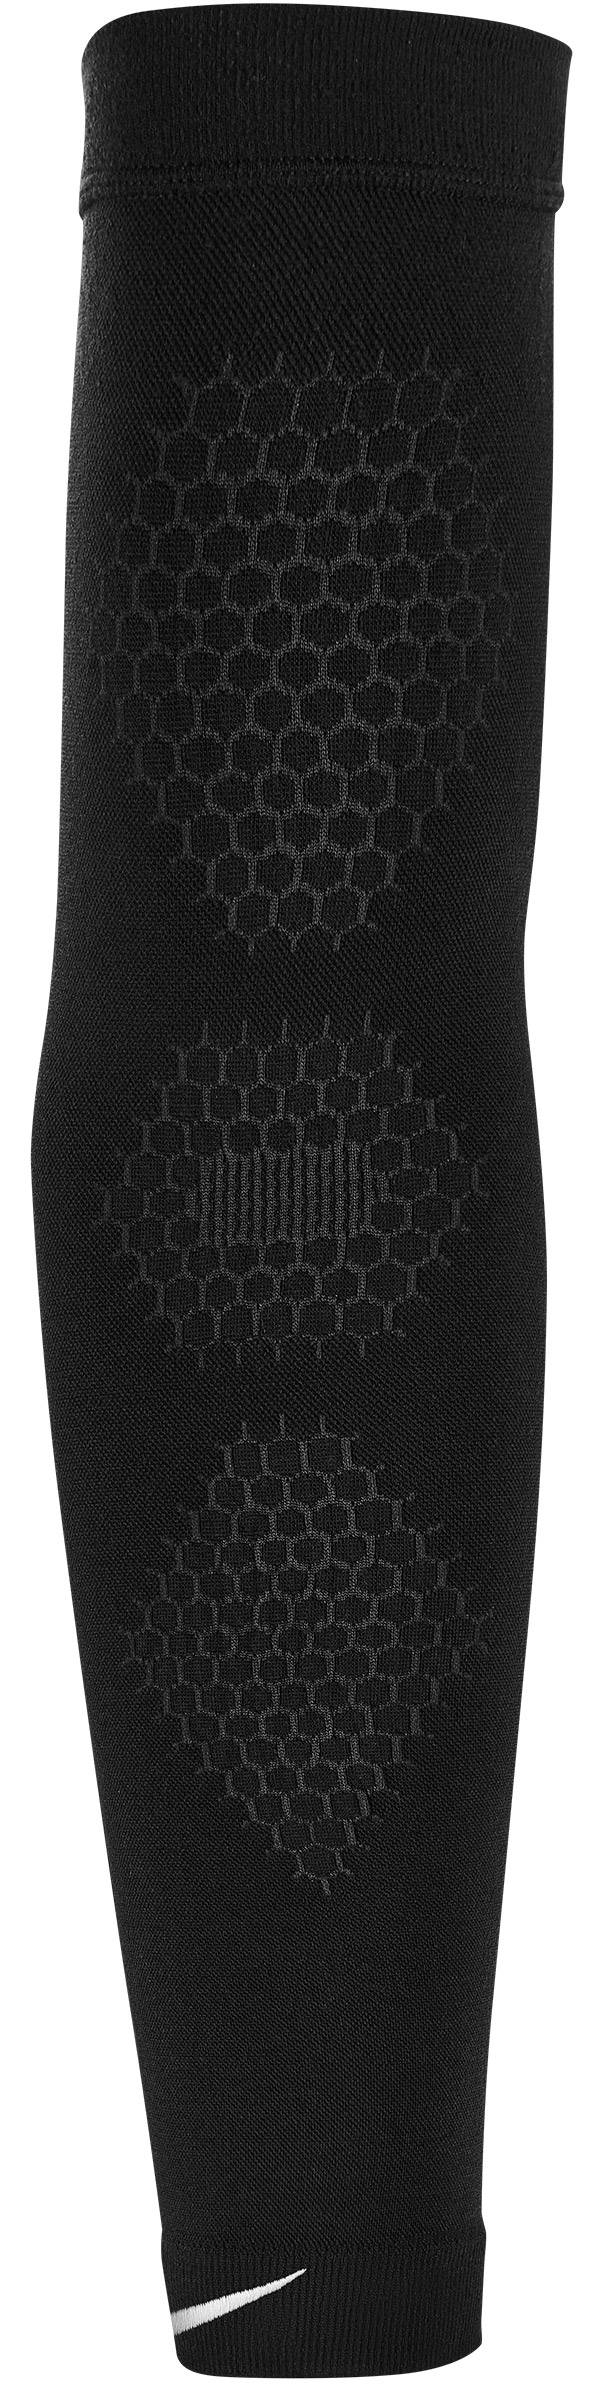 Nike Pro Circular Knit Compression Arm Sleeves product image